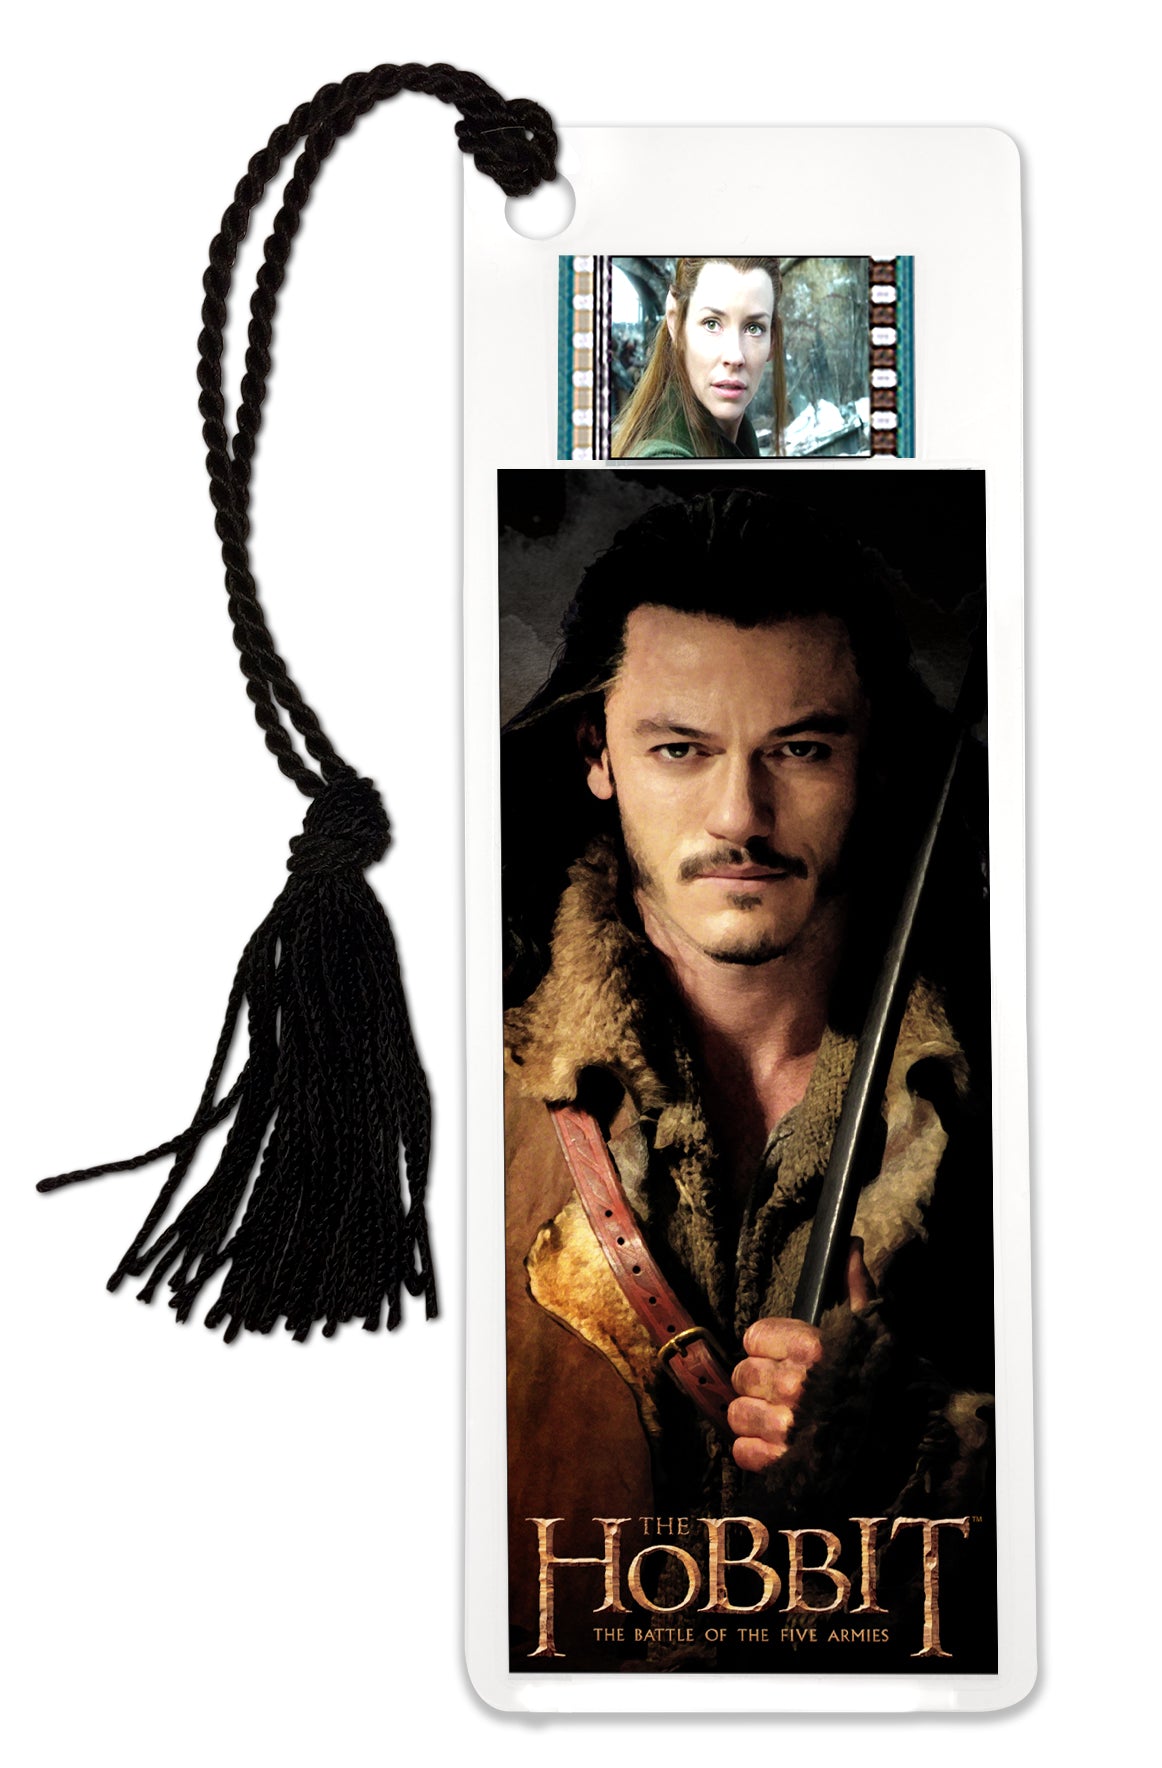 THE HOBBIT: THE BATTLE OF THE FIVE ARMIES (Bard) FilmCells™ Bookmark USBM687